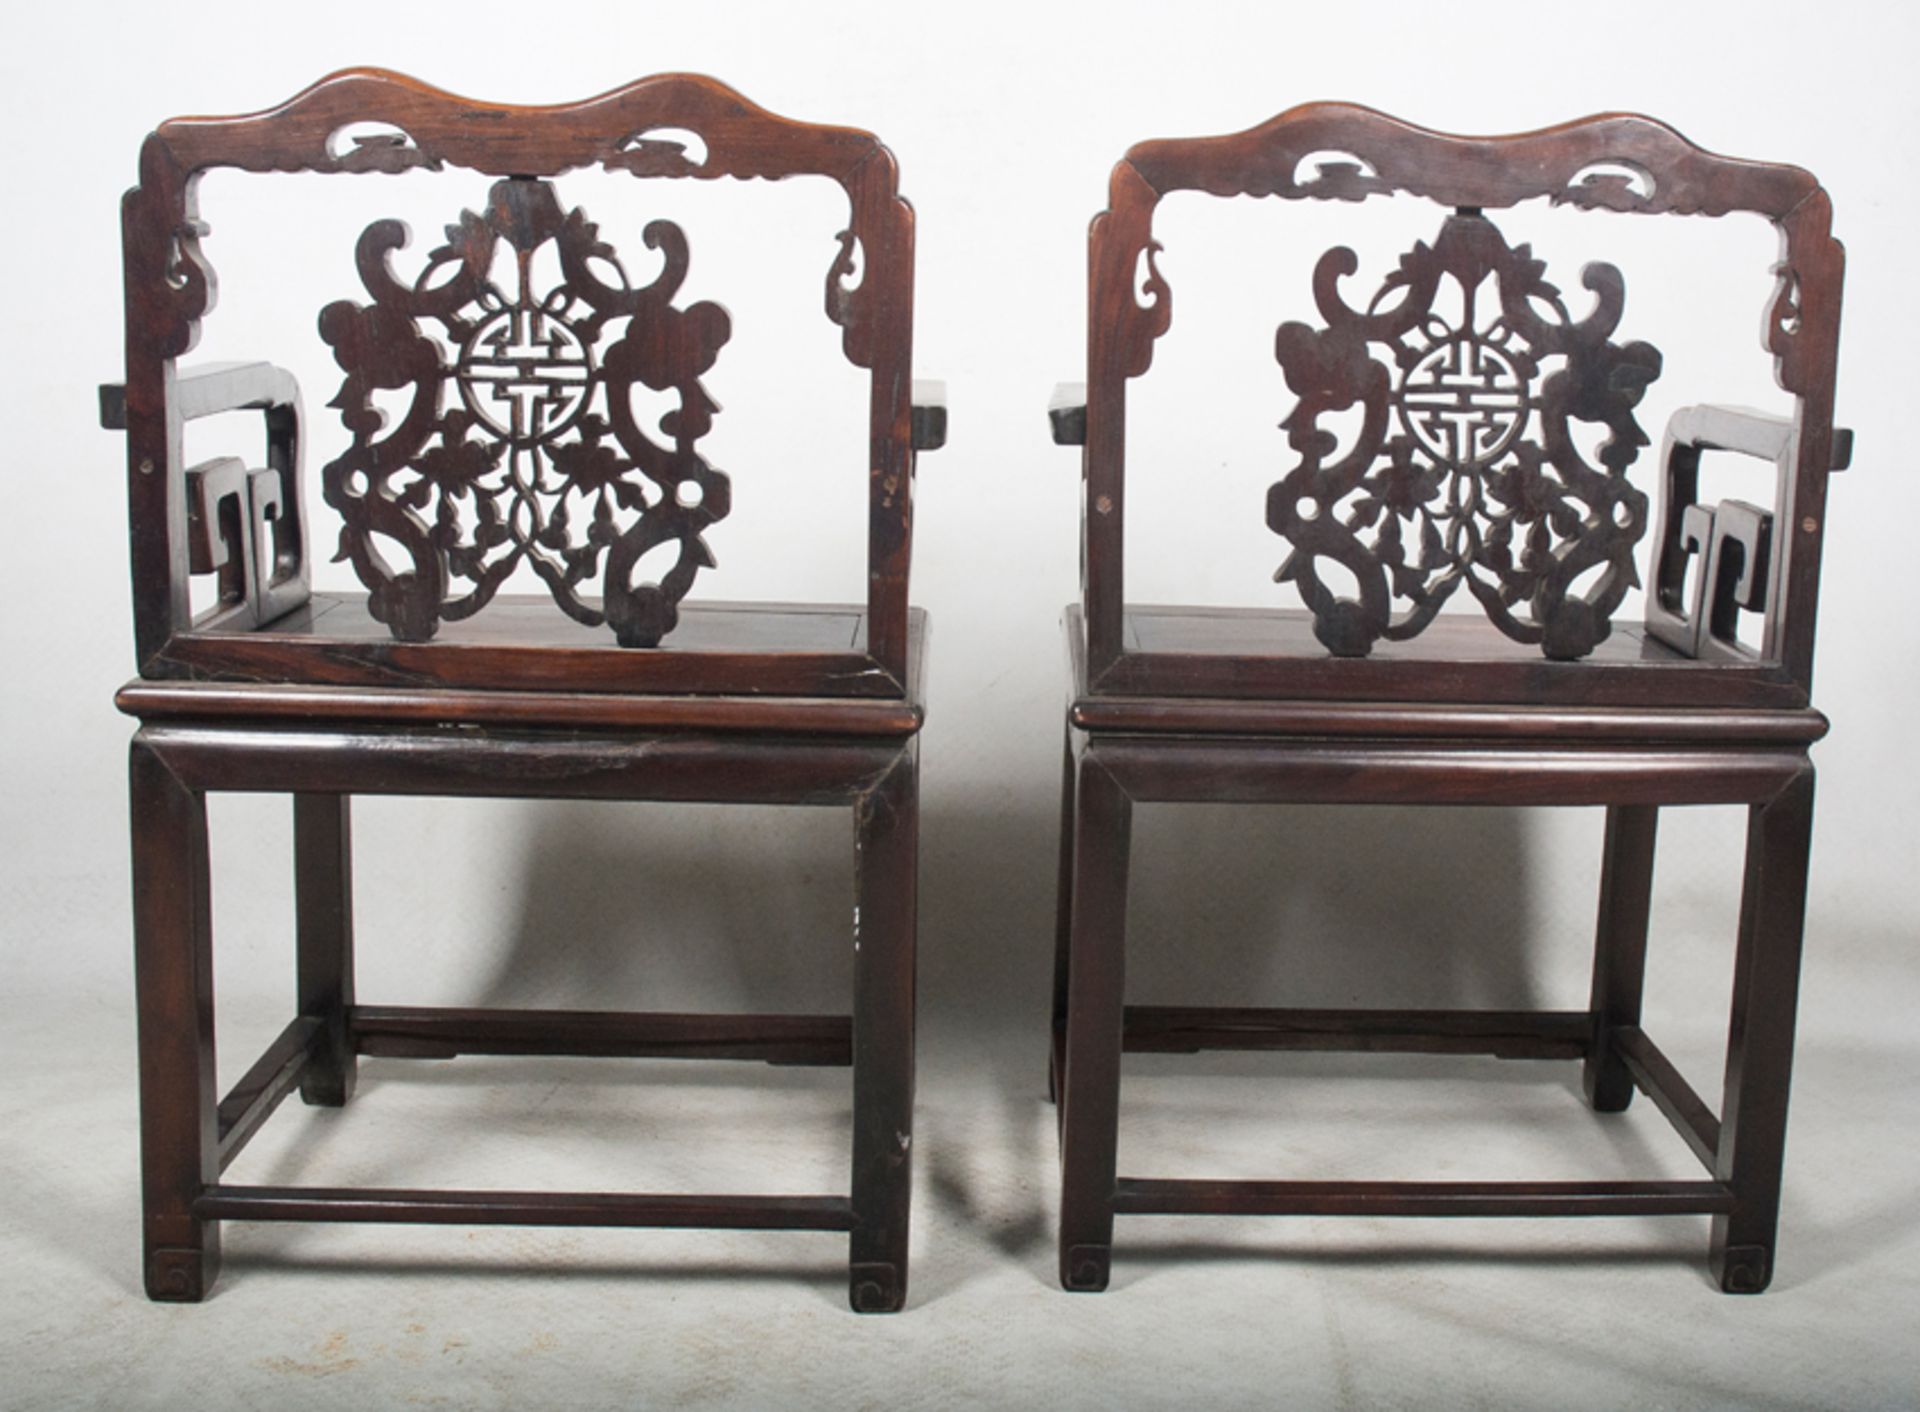 Pair of wooden chairs. China. 19th century. - Image 3 of 3